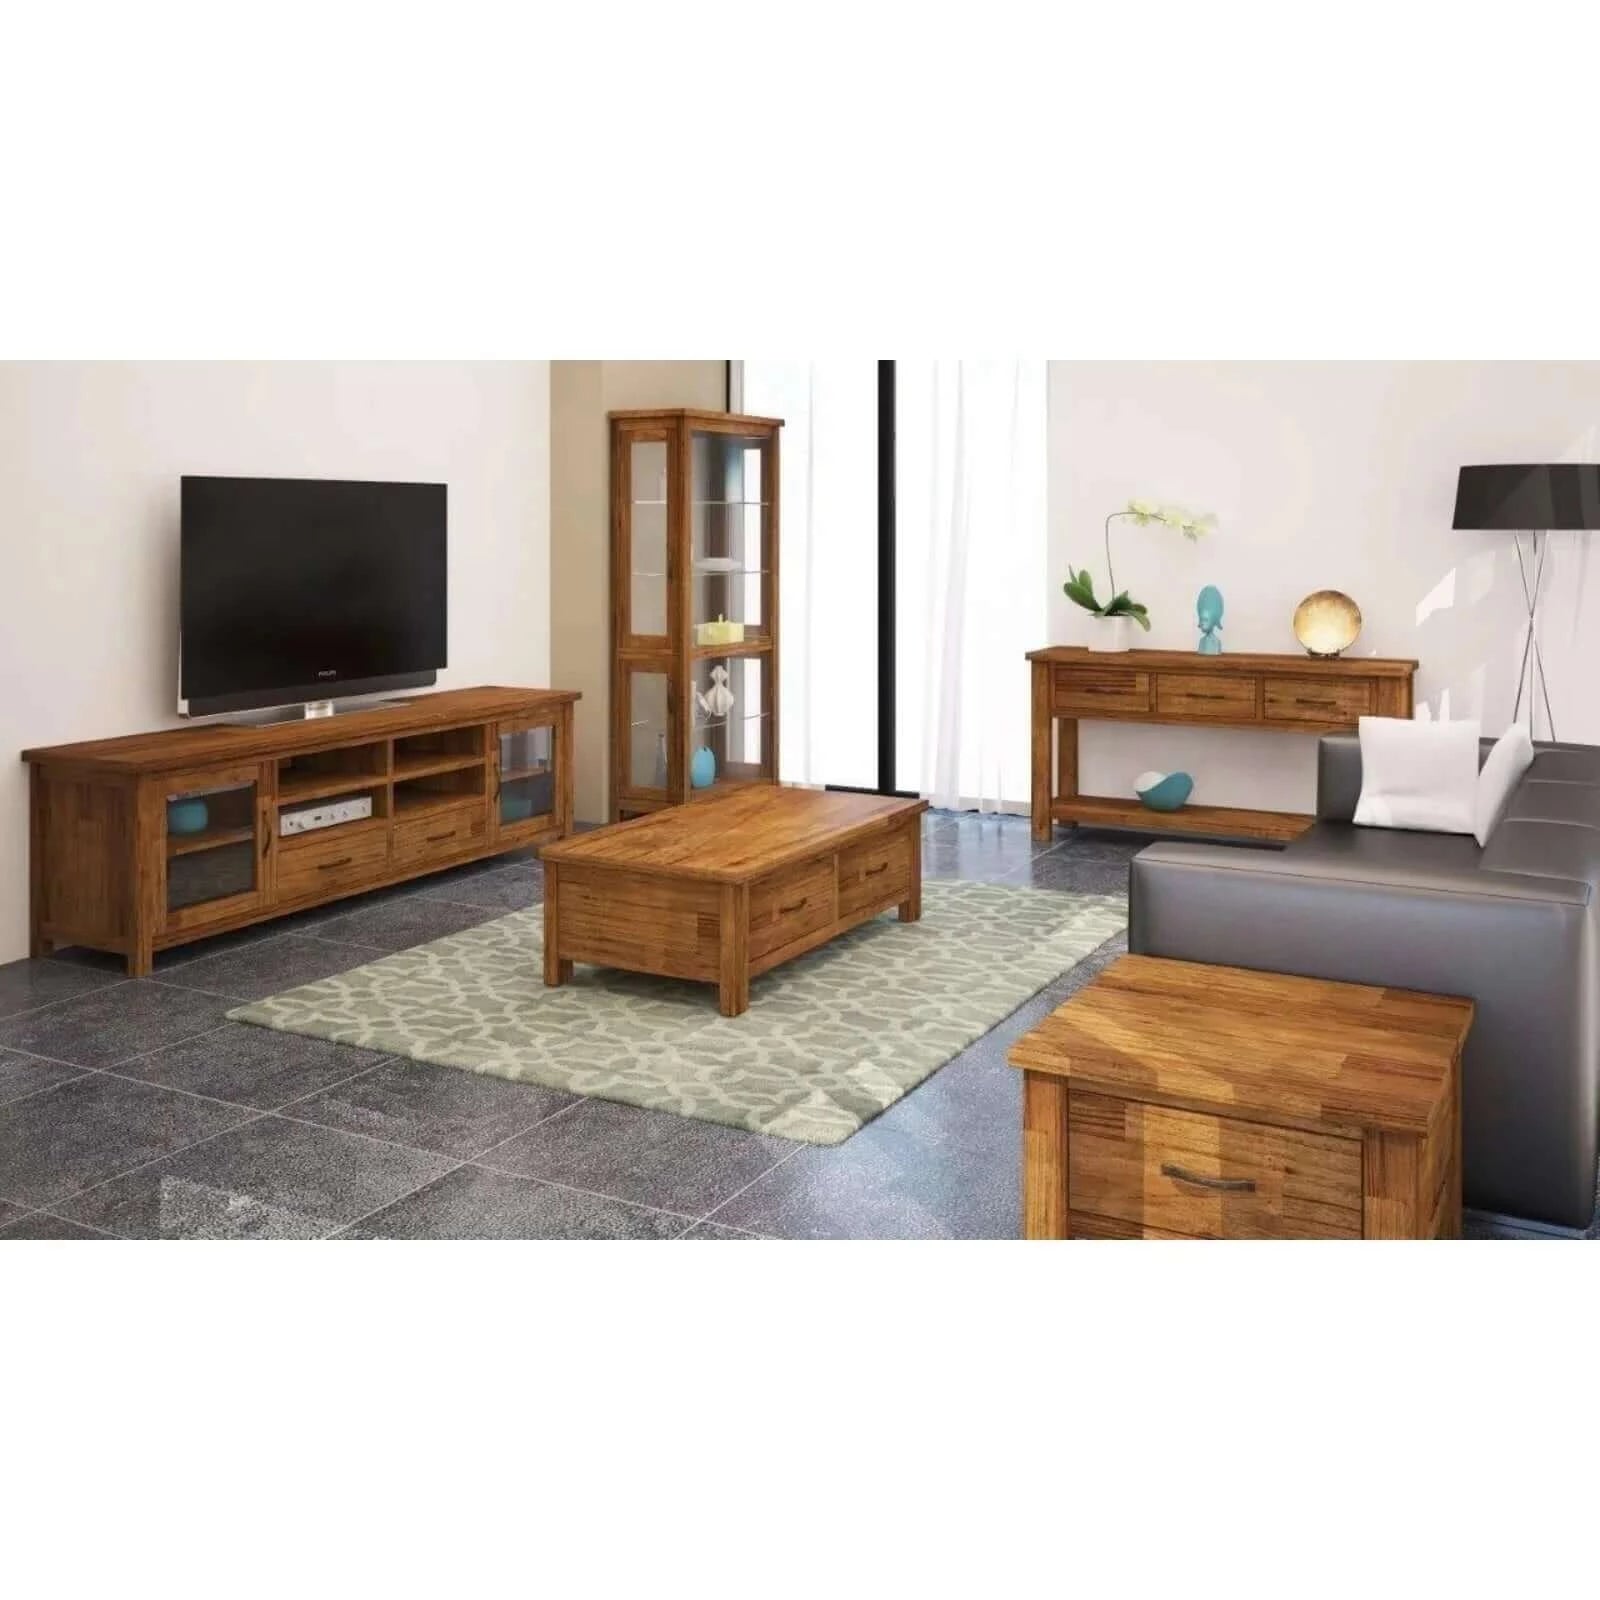 Birdsville Coffee Table 120cm 2 Drawer Solid Mt Ash Timber Wood - Brown-Upinteriors